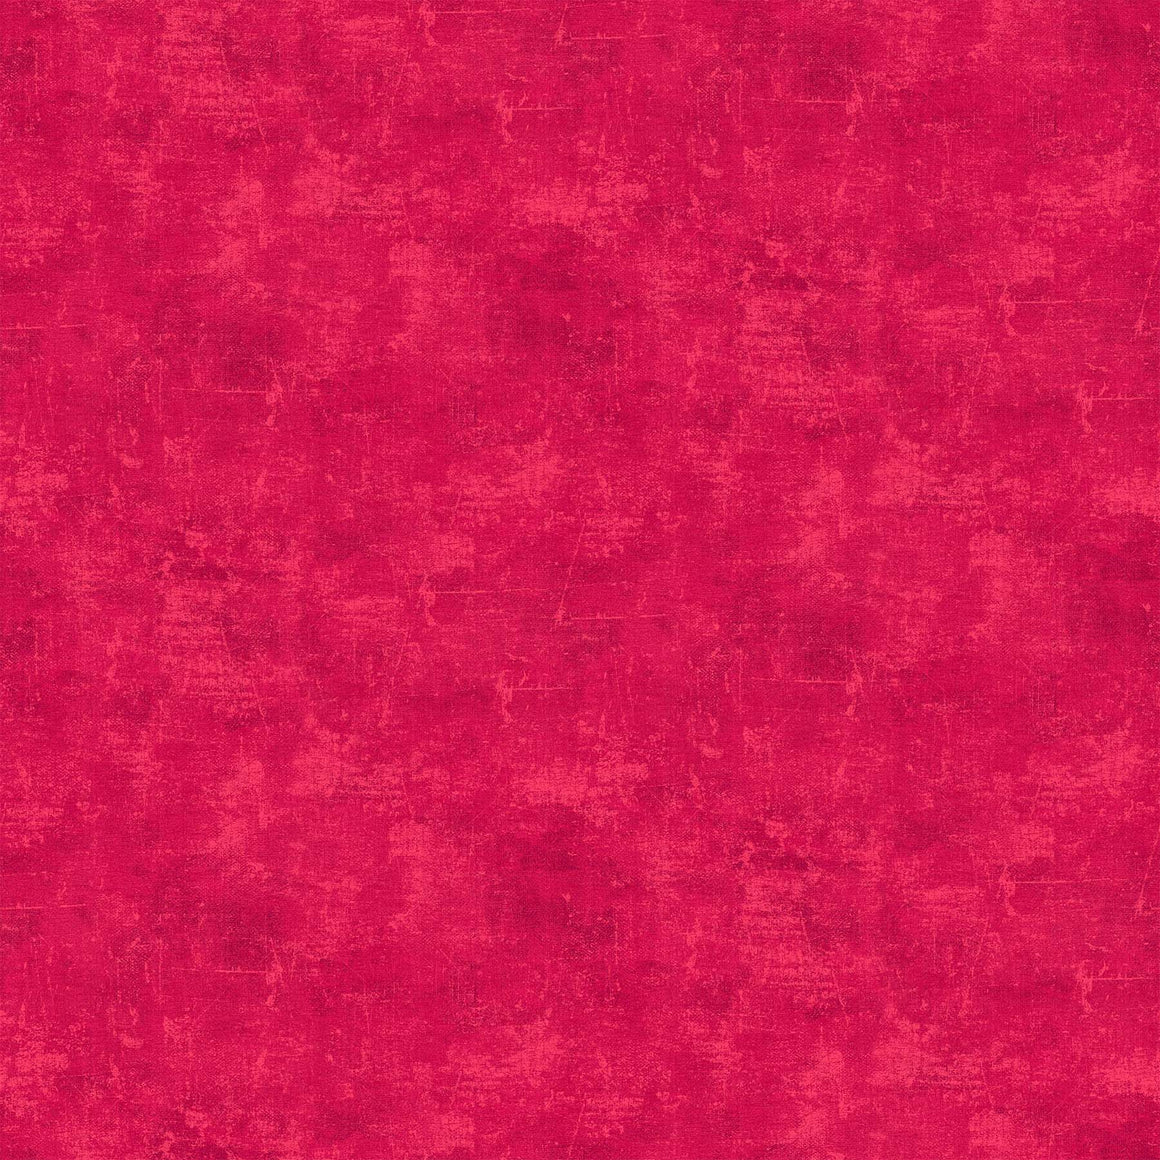 Lipstick - Canvas Texture - 9030-22, Designer Fabric, Northcott, [variant_title] - Mad About Patchwork